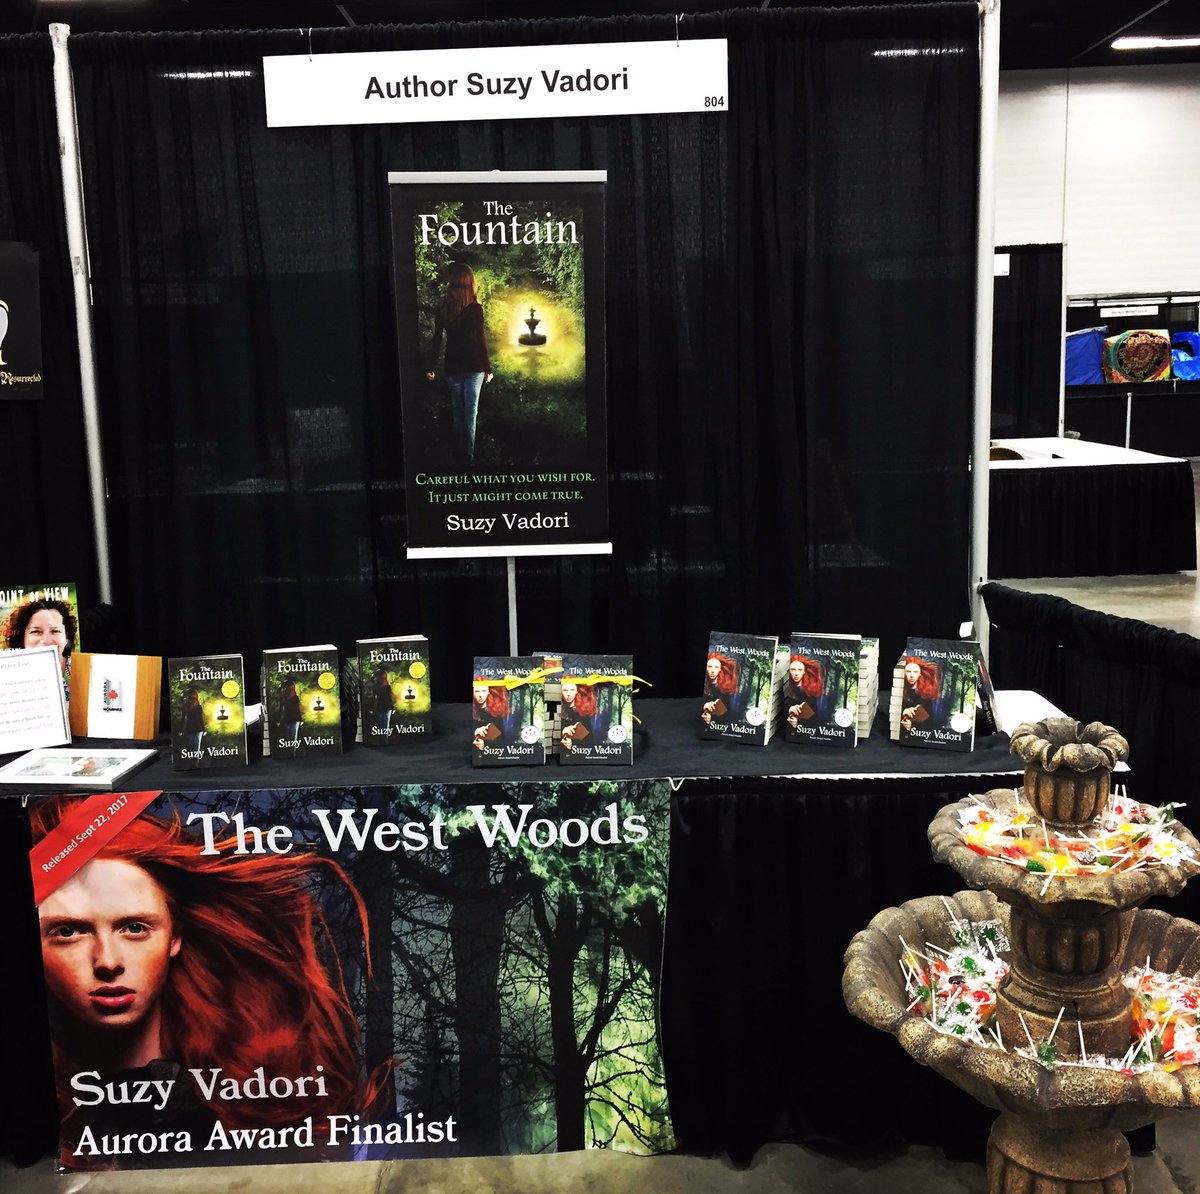 Ready at #EdmontonExpo! Get #TheFountain & #TheWestWoods  #launch day! #yeg #comiccon 

Booth 804, near mini donuts! I have 🍭⛲️#amwriting